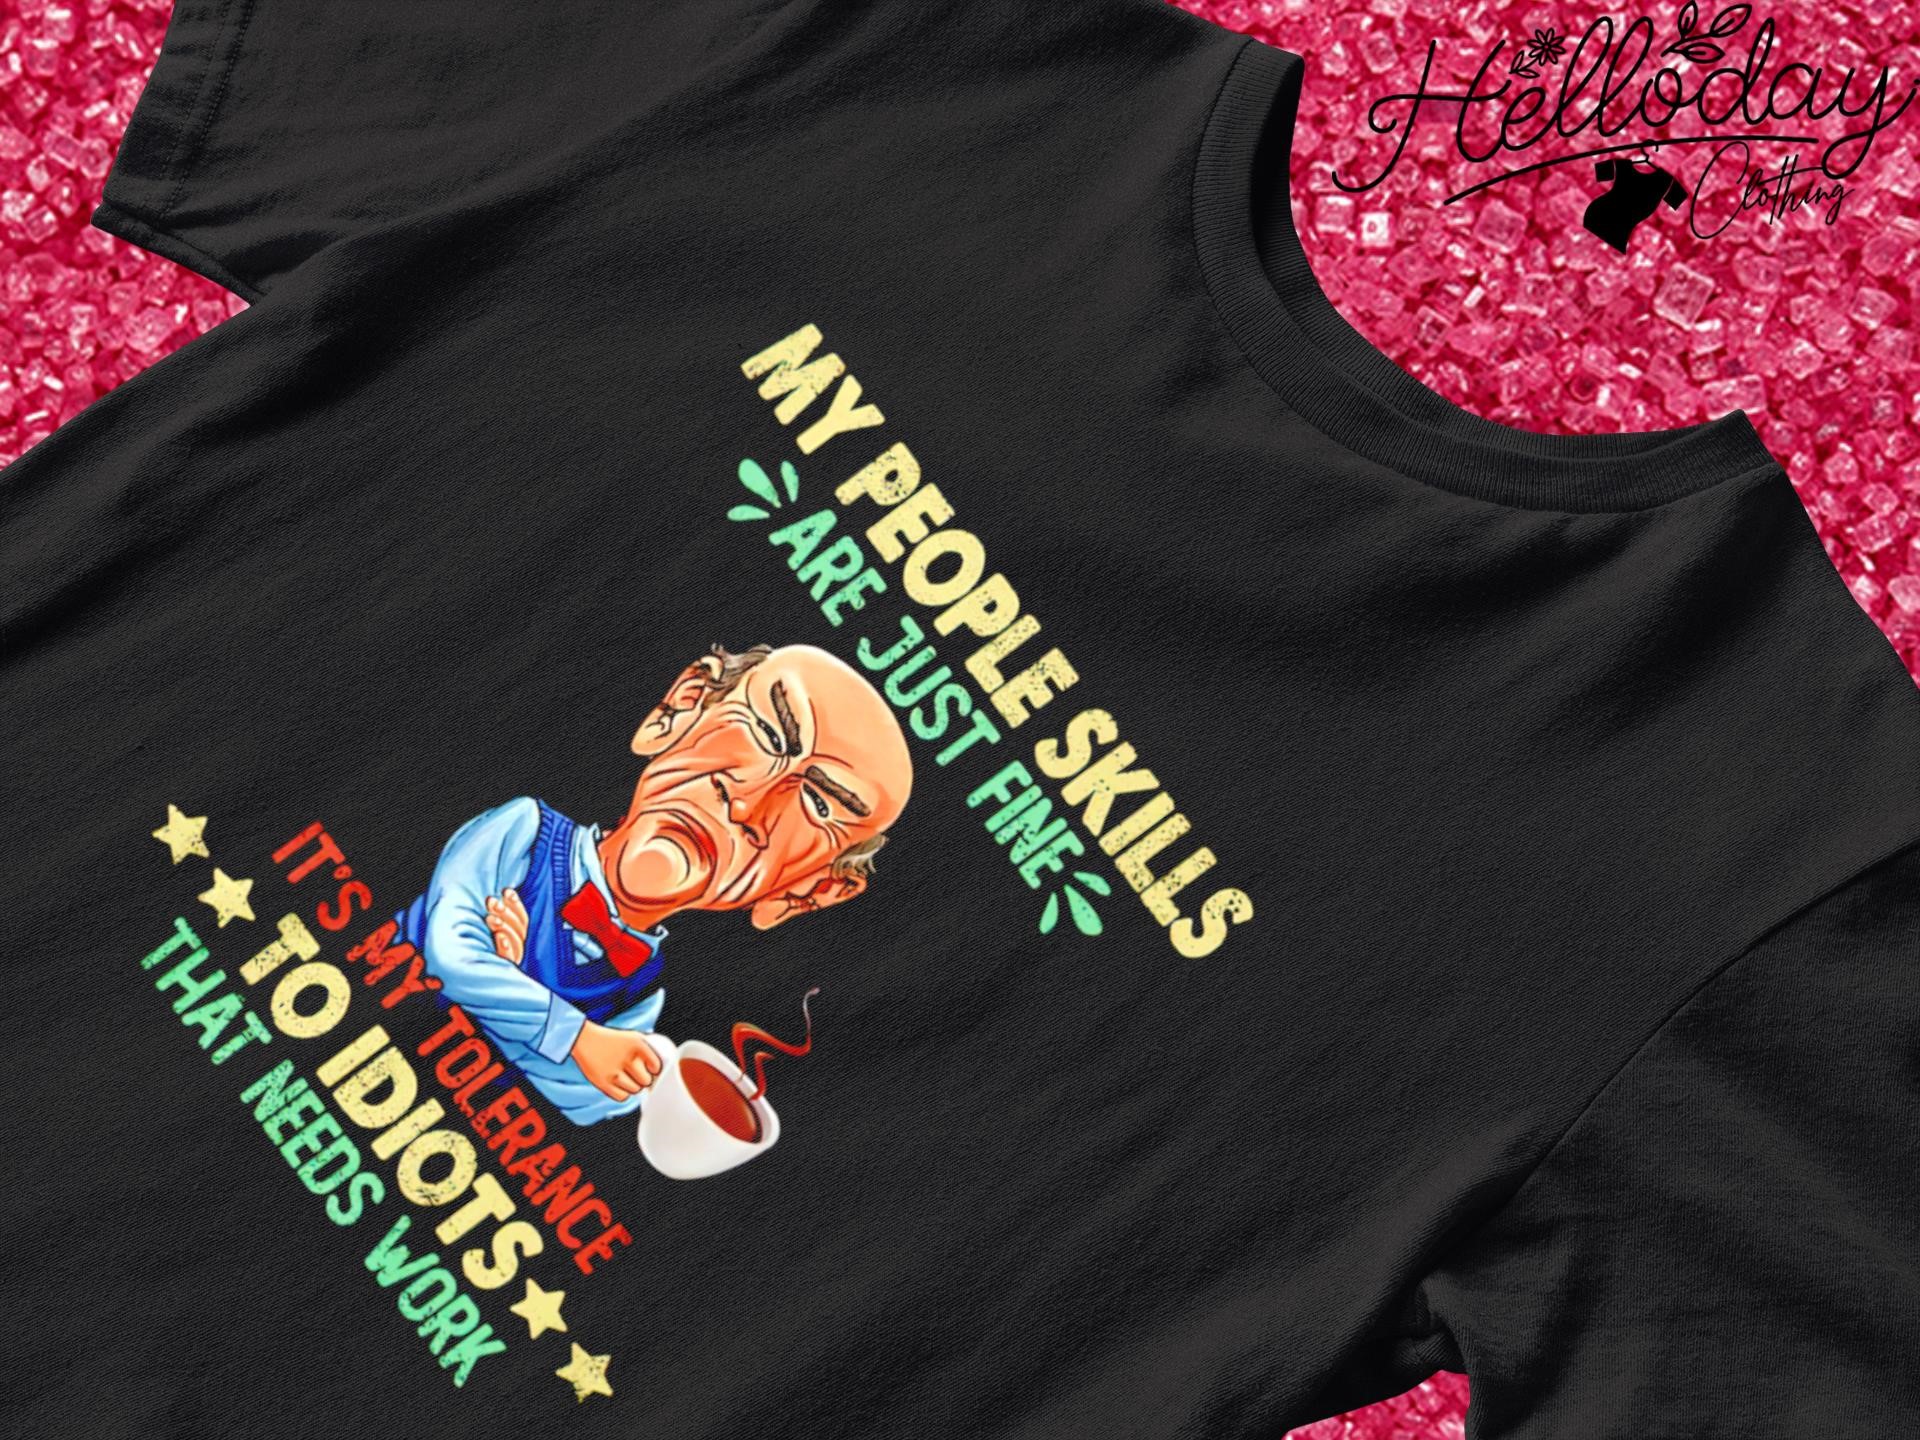 Jeff Dunham my people skills are just fine to Idiots that needs work shirt